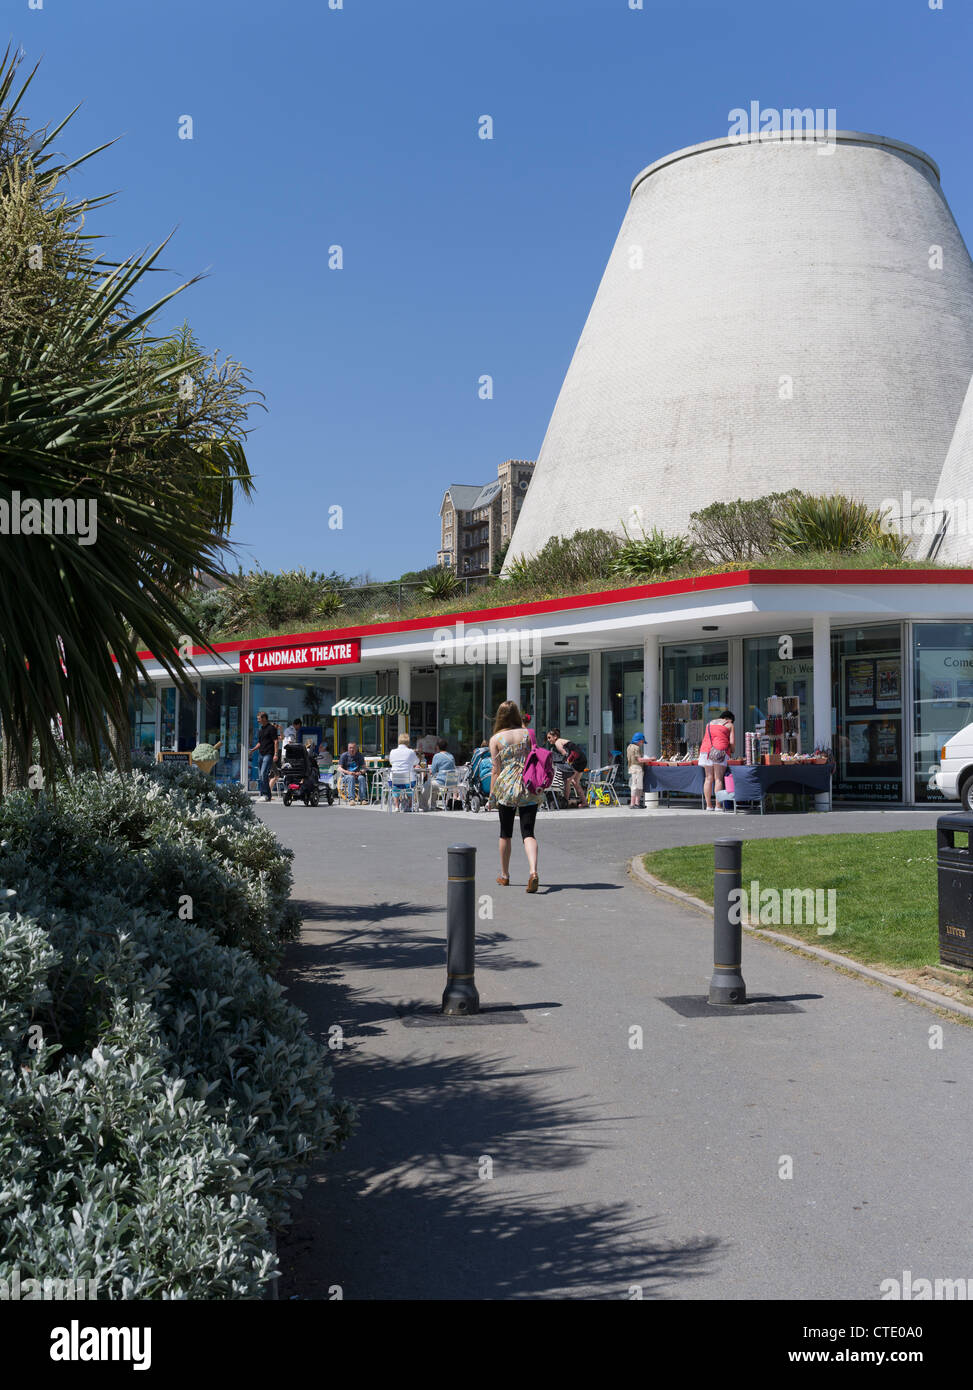 dh Landmark theatre ILFRACOMBE DEVON North Devonshire girl cafe shops outdoor day holiday tourists Stock Photo